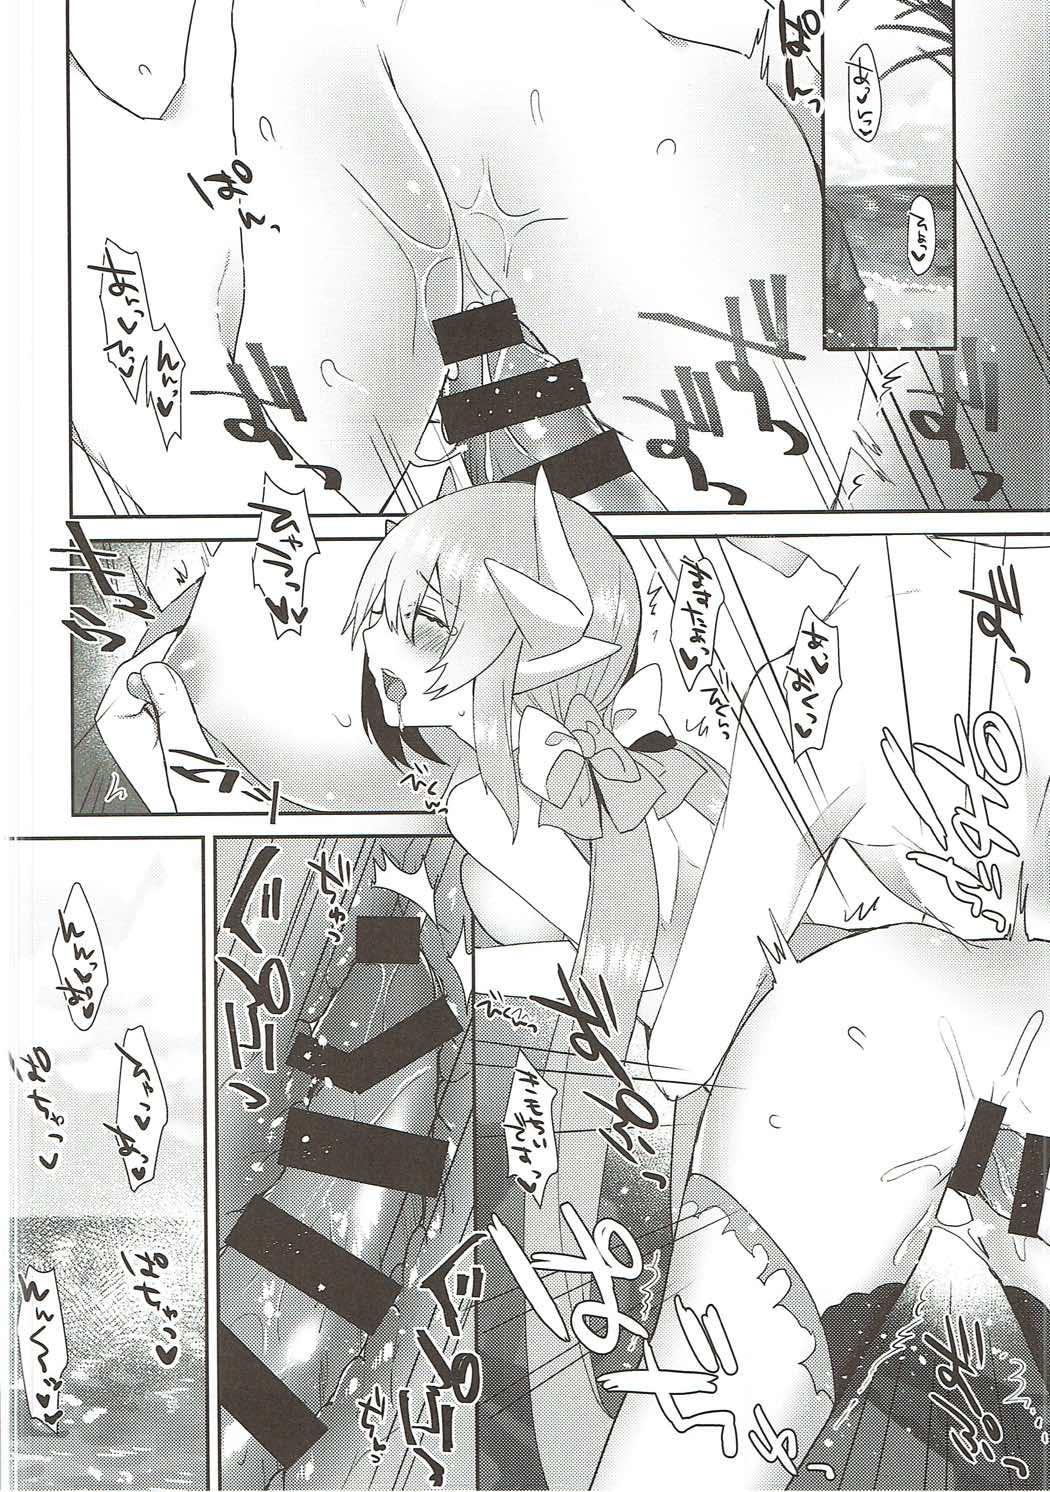 Tiny Girl Kiyohime Summer! - Fate grand order Humiliation Pov - Page 11